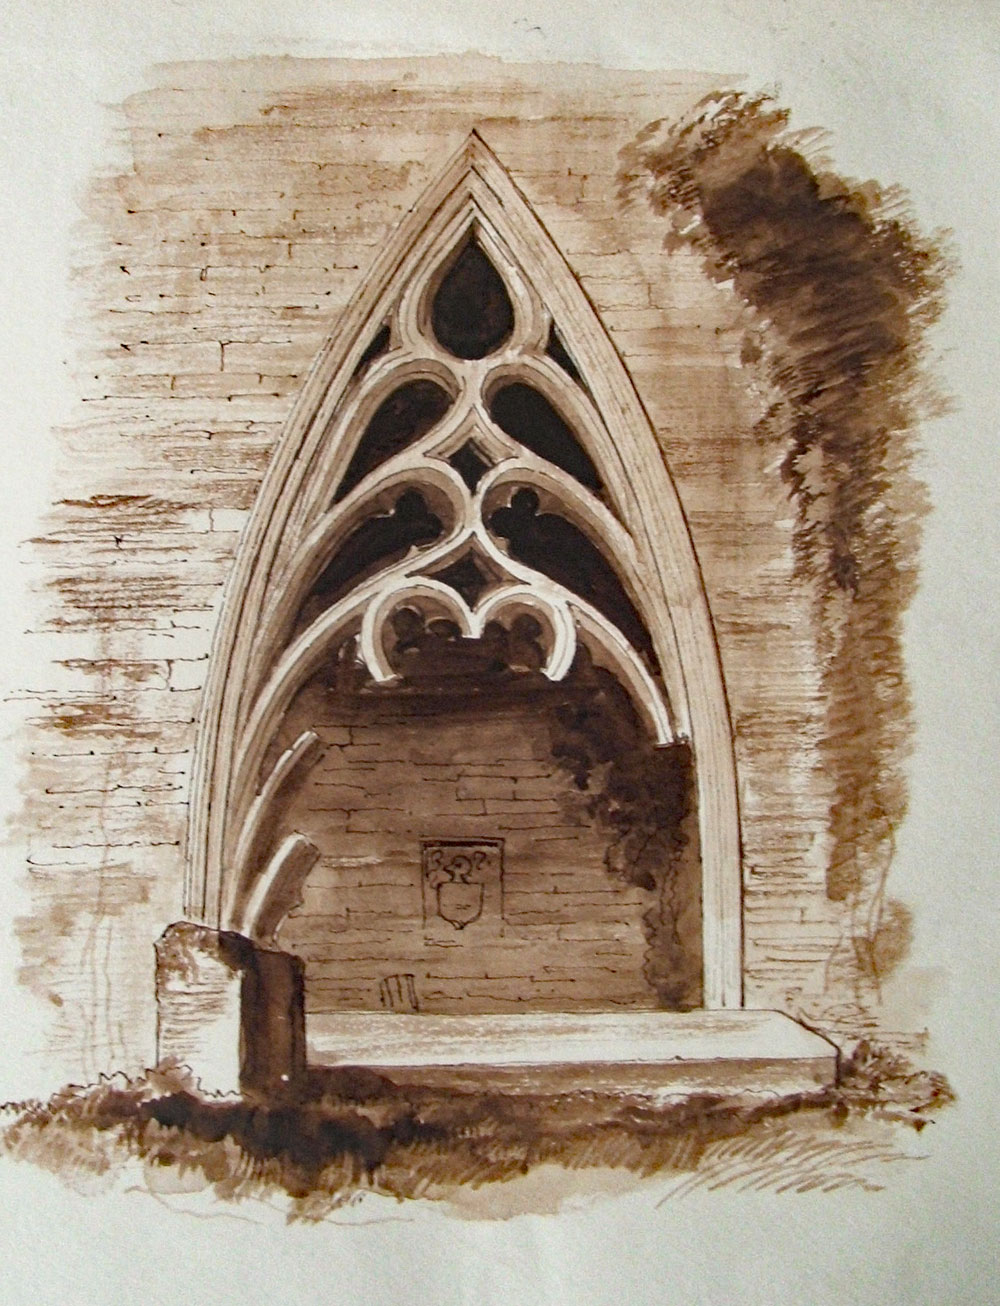 A view of the highly ornate O'Crean Memorial which is the oldest surviving burial in the Abbey, which dates to 1506, painted by William Wakeman in August of 1880.